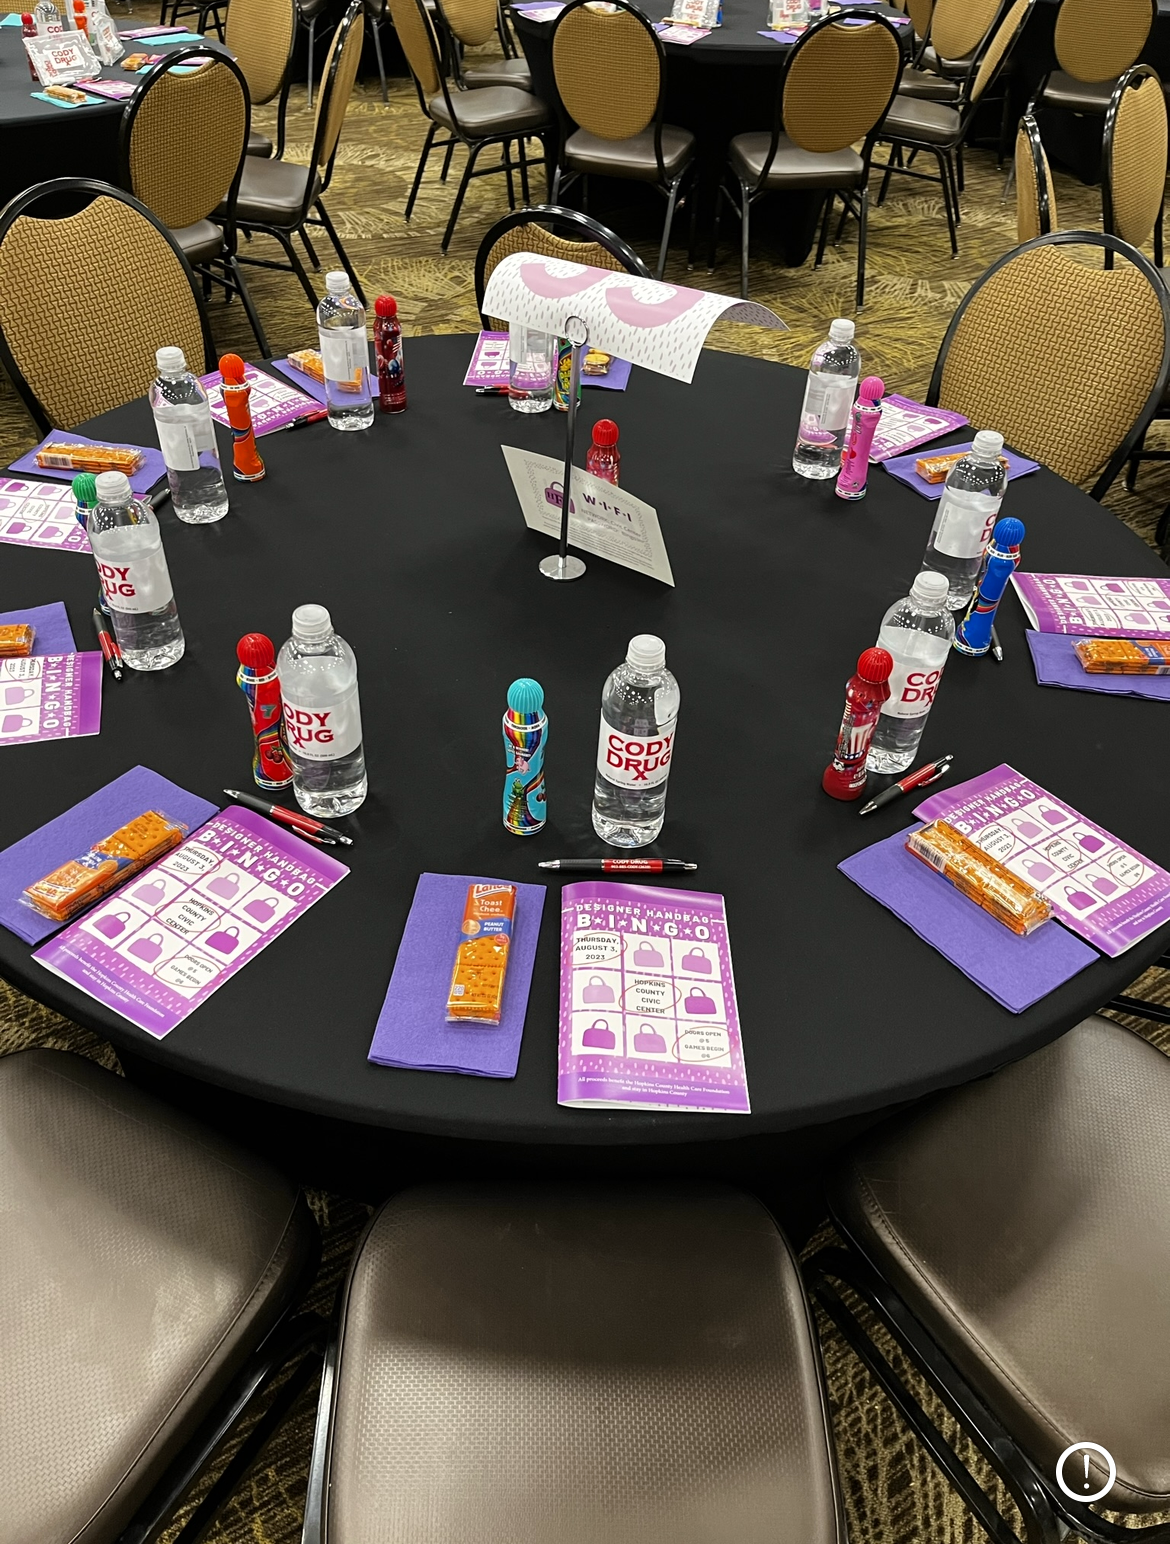 Plans Underway for the Hopkins County Health Care Foundation’s First MAN Bingo